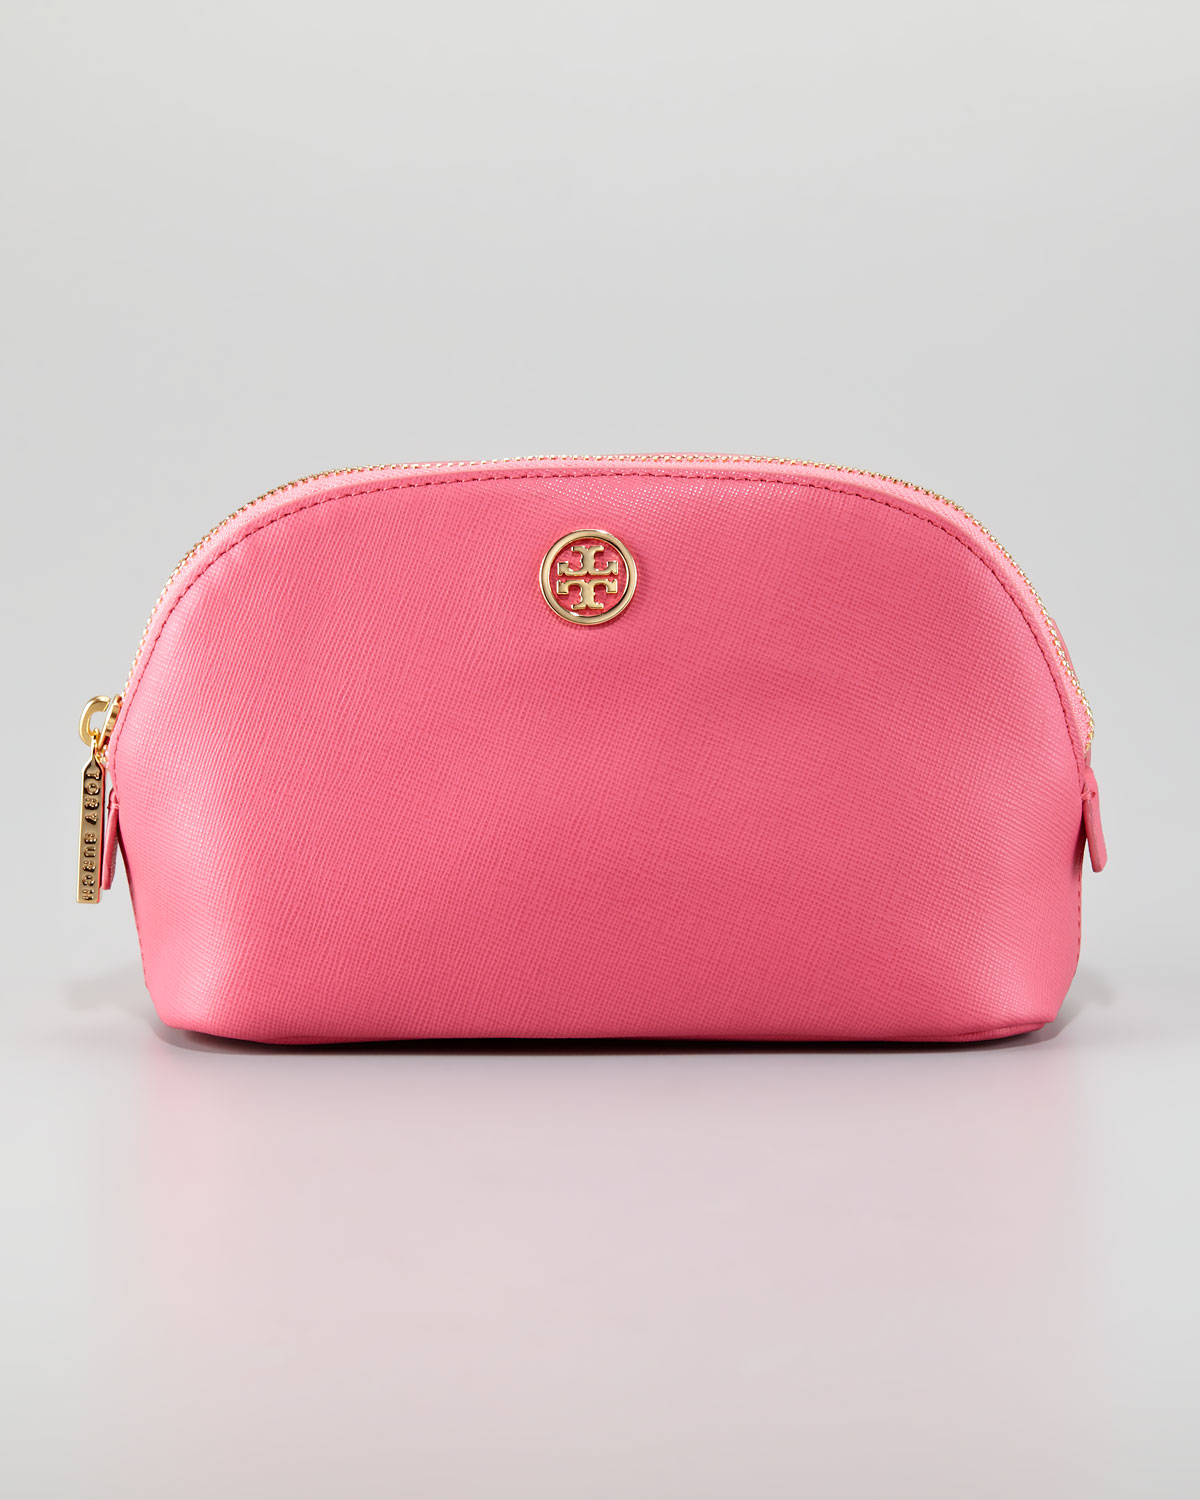 Tory burch Robinson Makeup Bag in Pink | Lyst